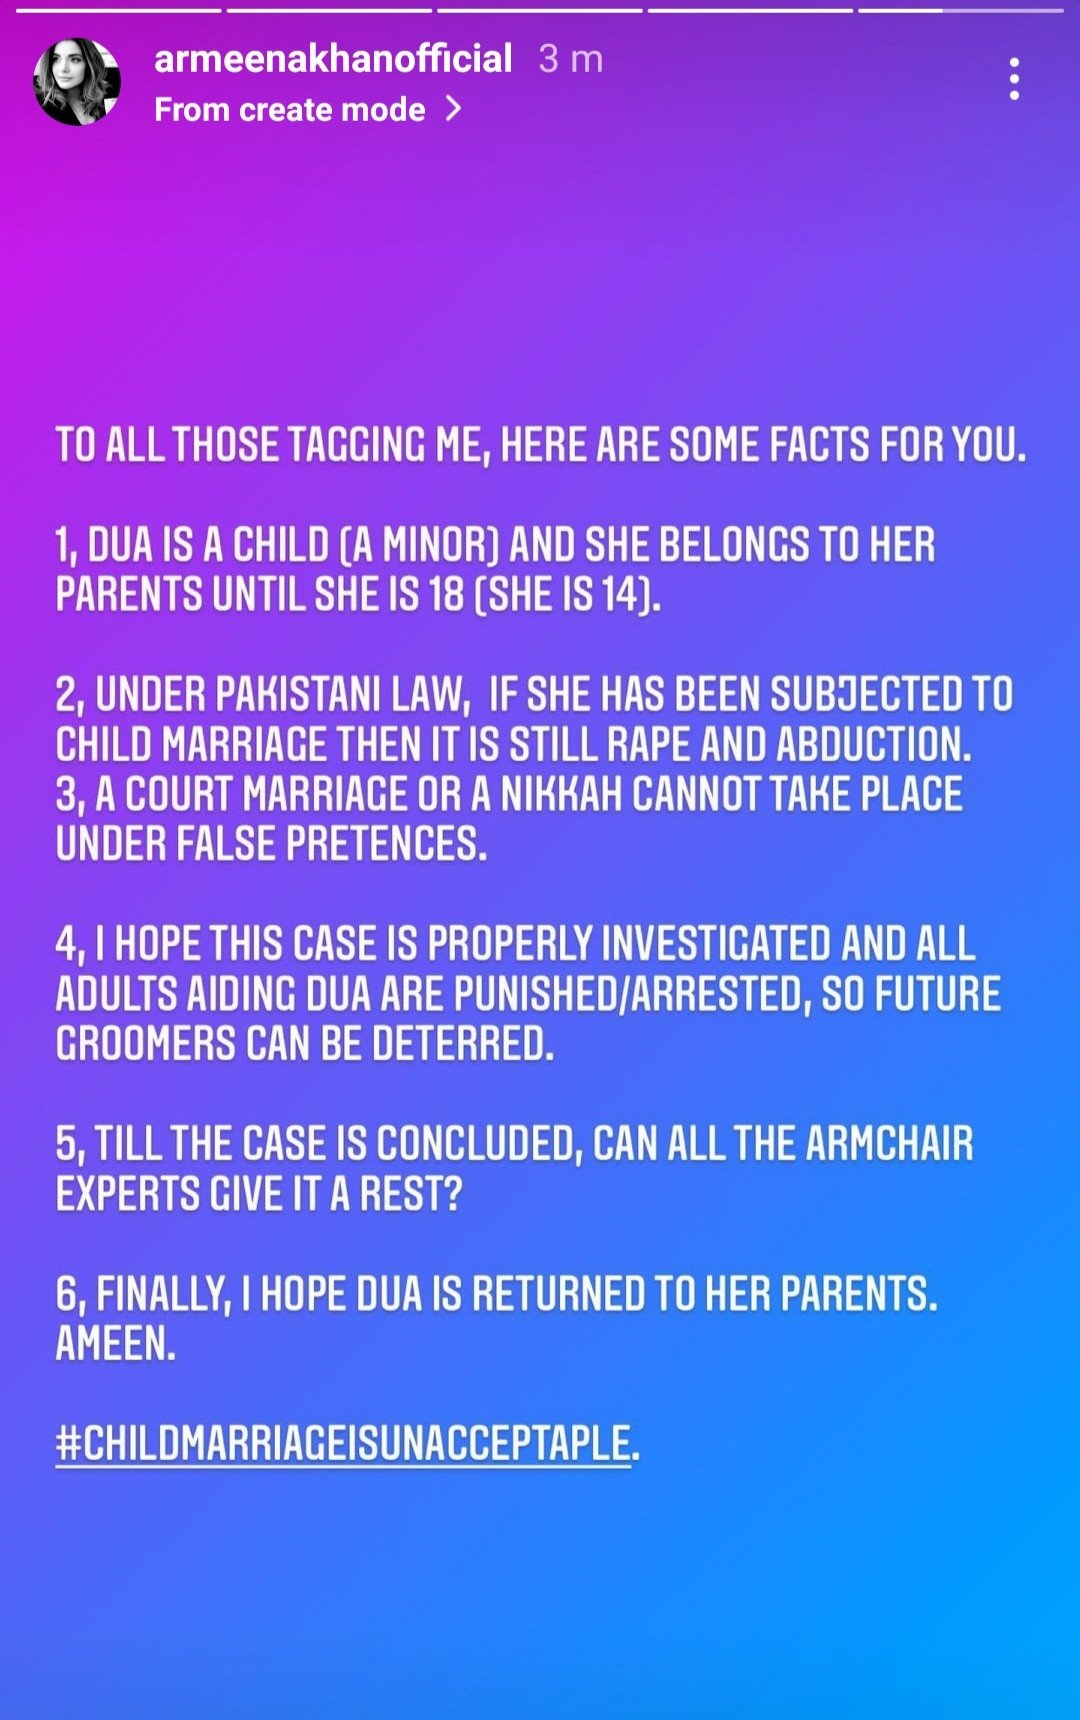 Sajal Aly, Armeena Khan and others weigh in on netizens’ reaction to Dua Zehra’s case